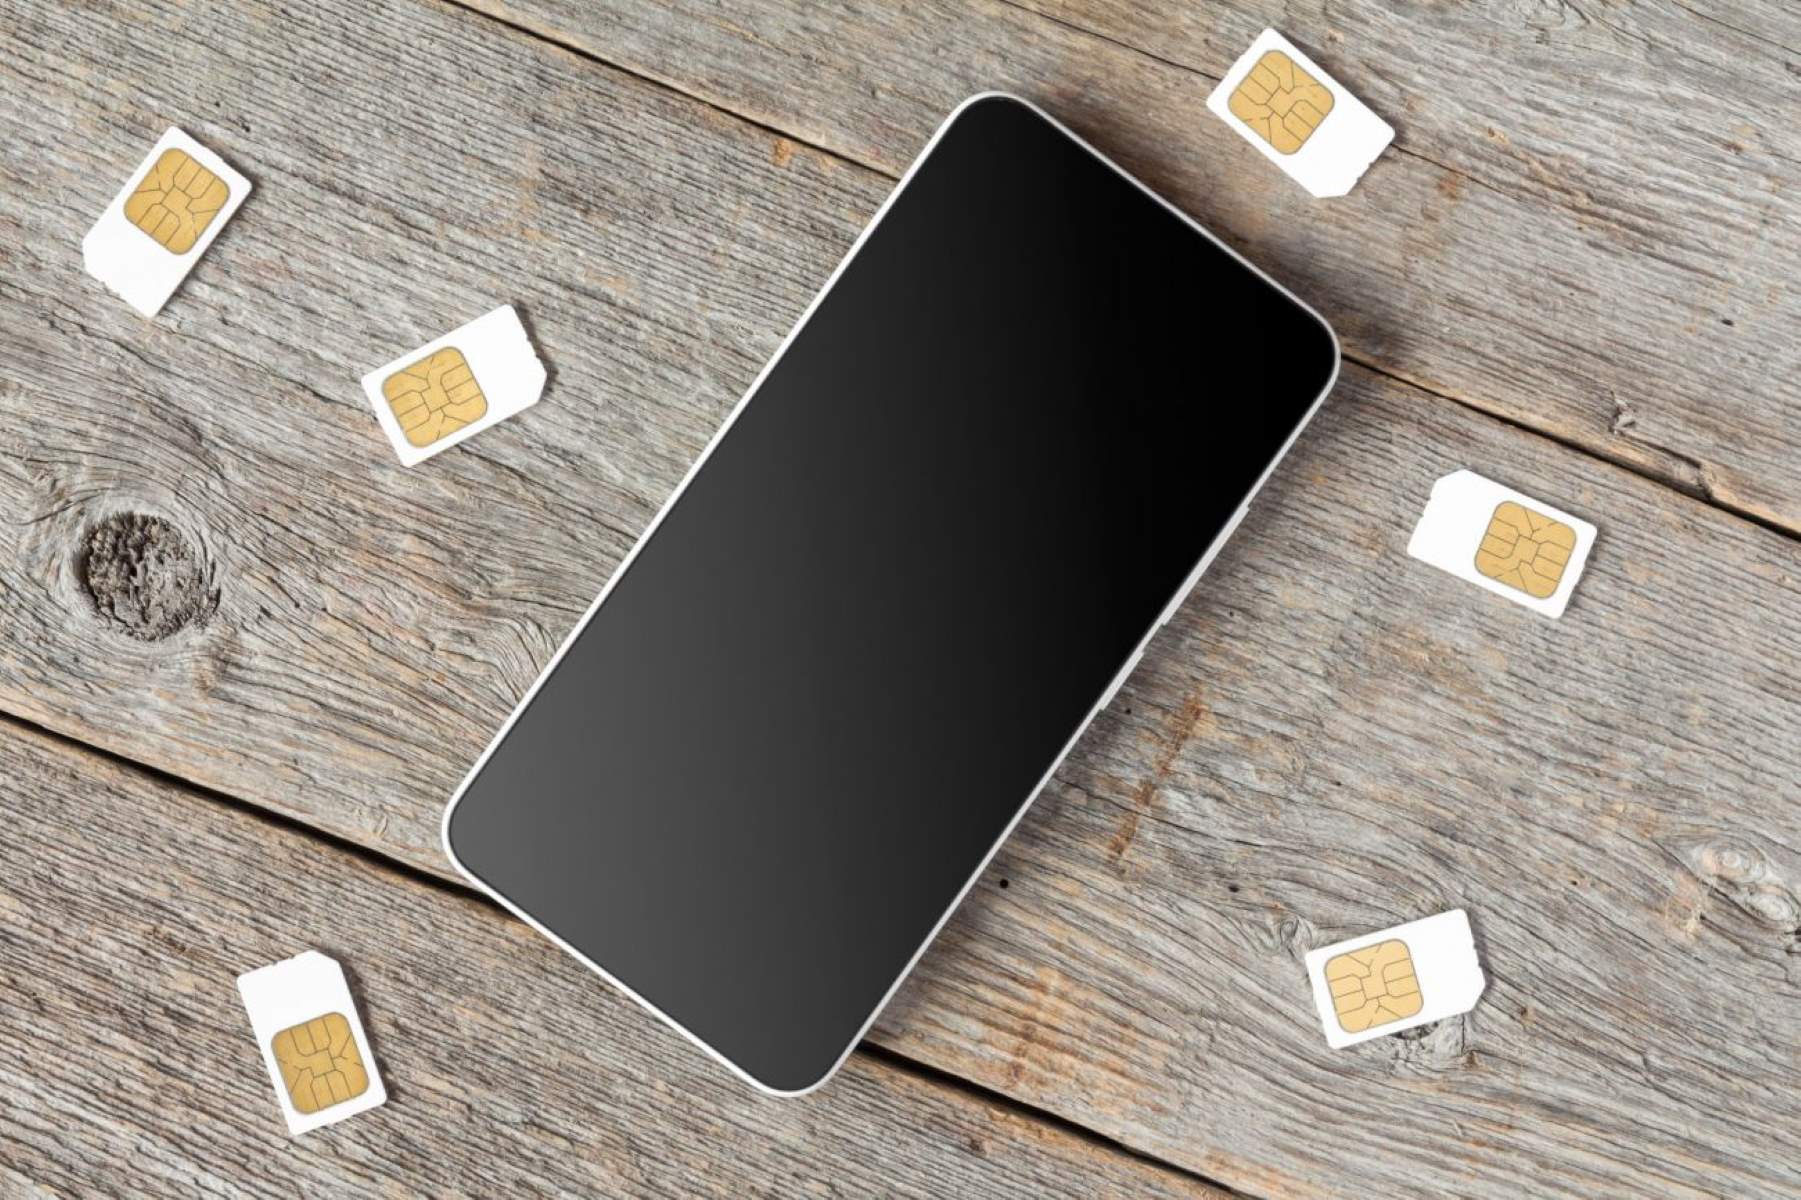 Retrieving Data From SIM Card: Step-by-Step Guide